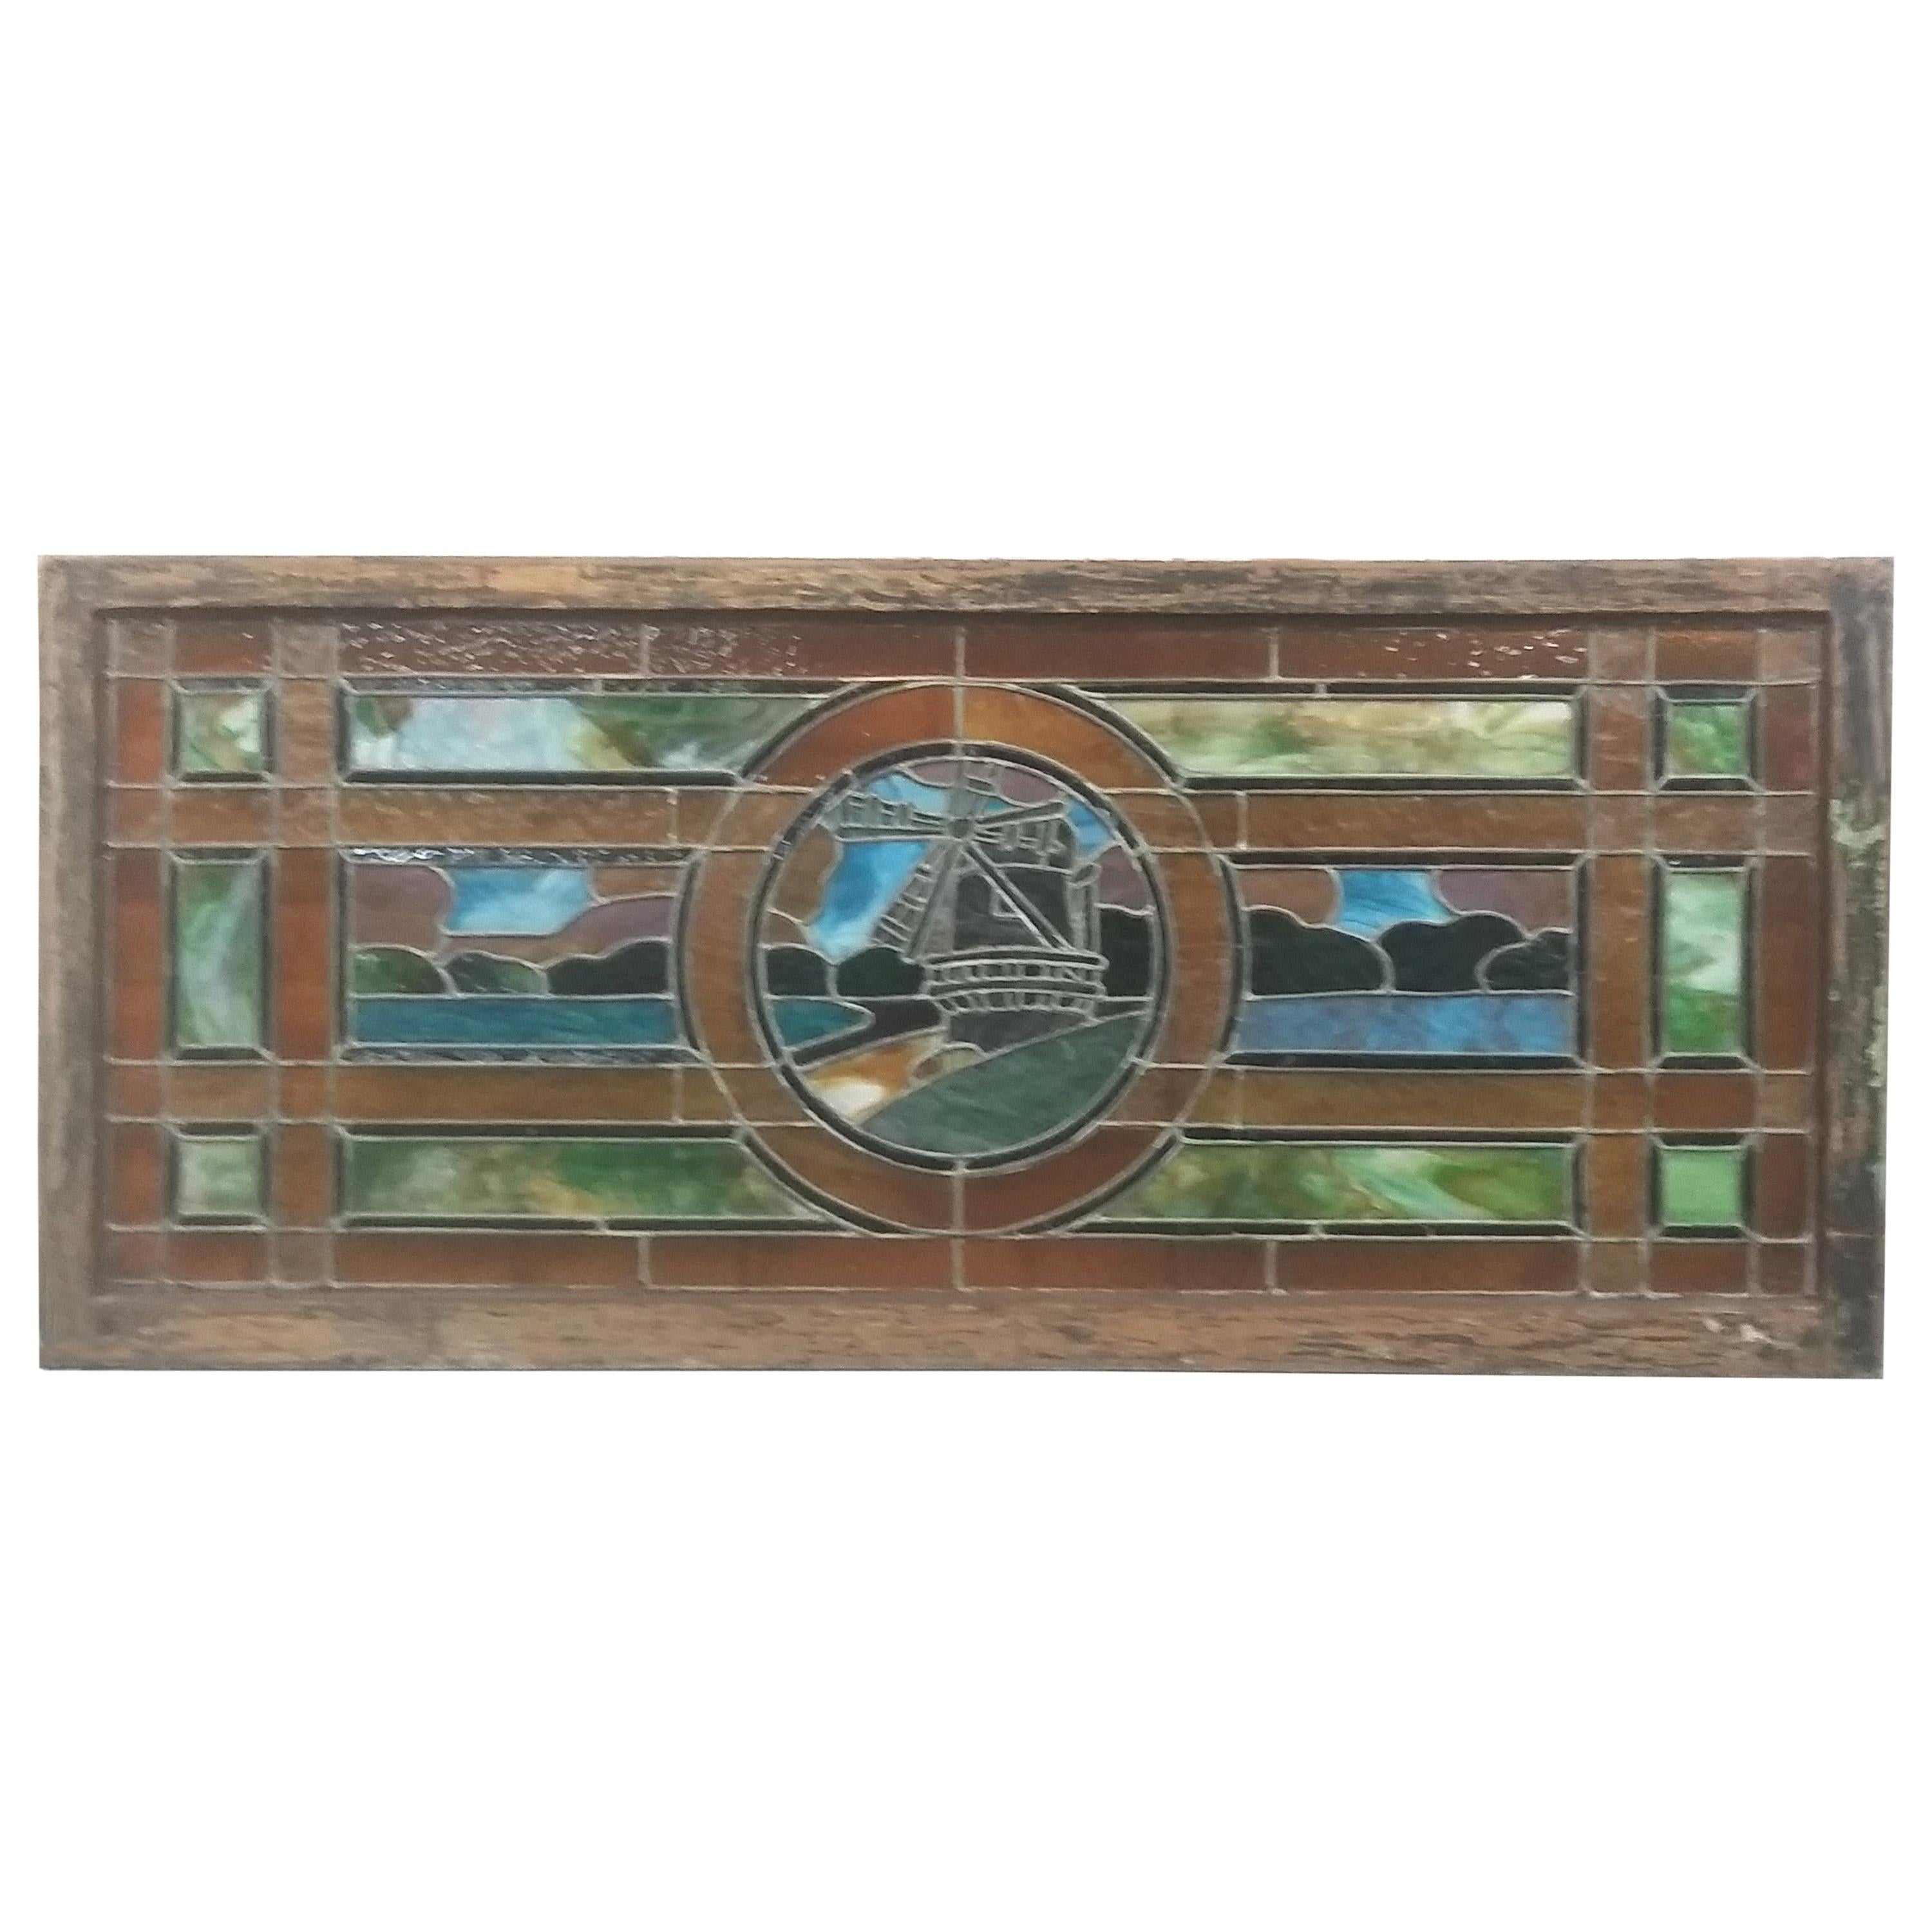 Vintage Windmill Motif Stained Glass Window Pastoral Sea & Sky Stain Glass Panel